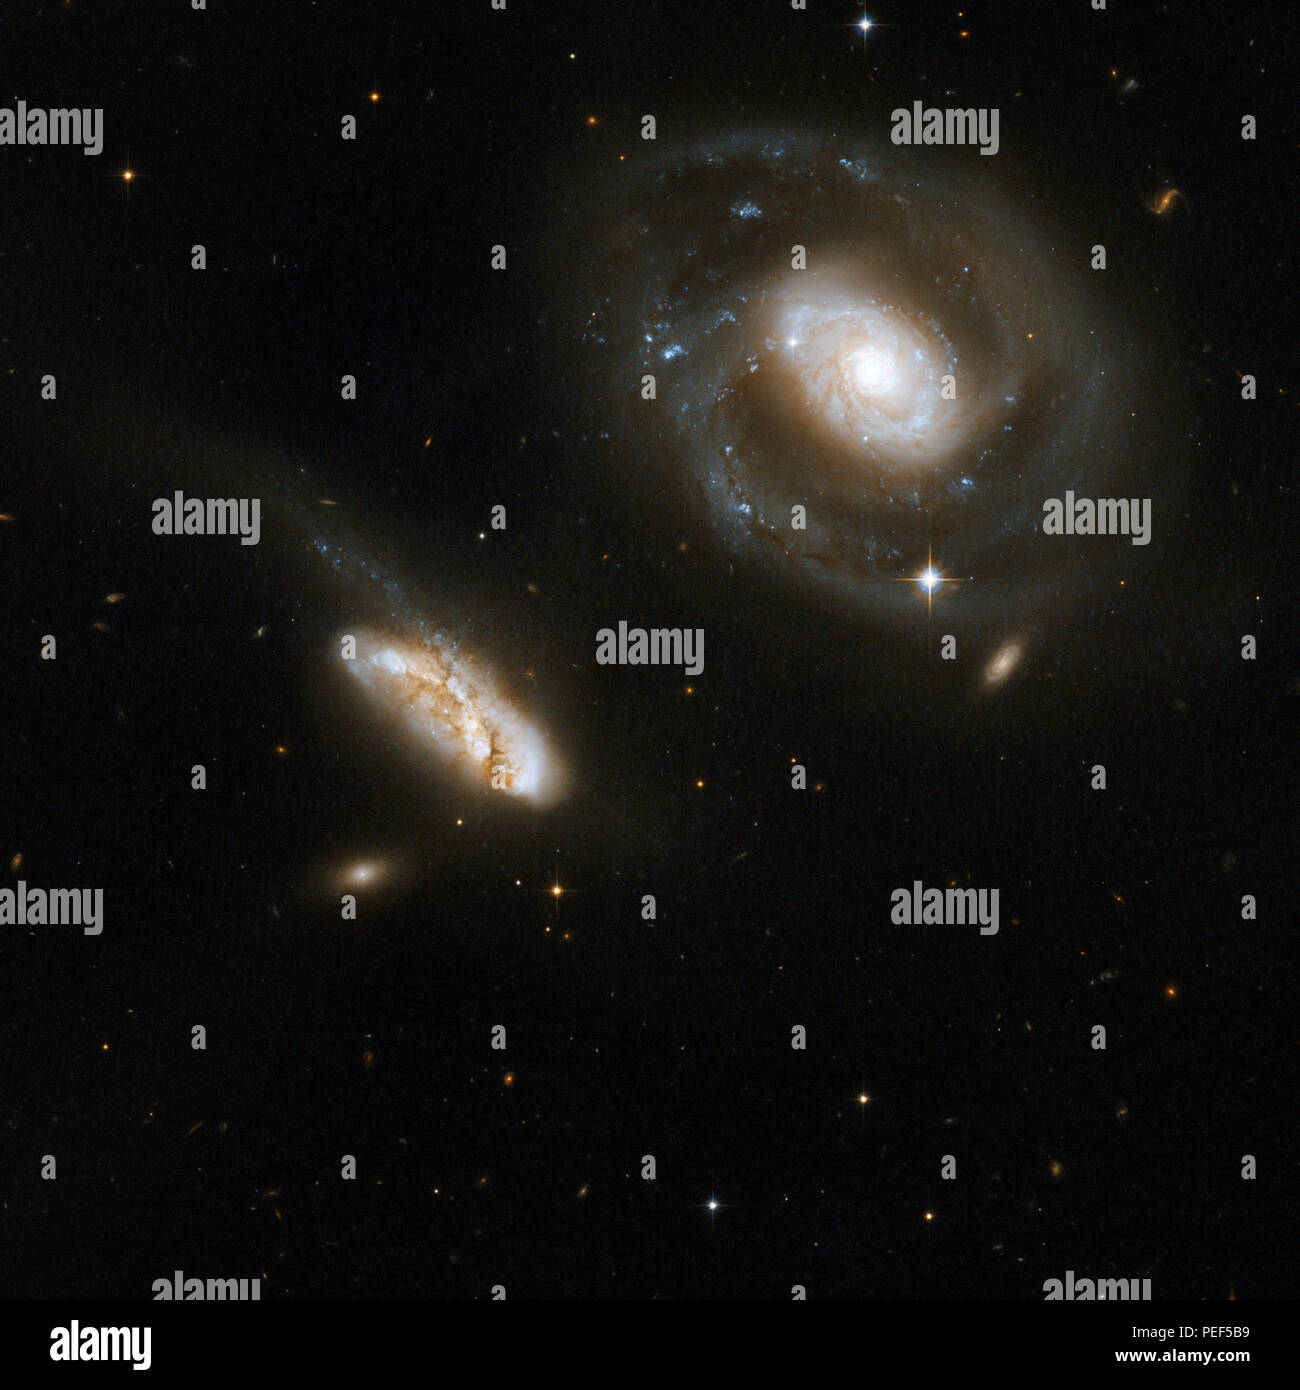 This is a stunning pair of interacting galaxies, the barred spiral Seyfert 1 galaxy NGC 7469 (Arp 298, Mrk 1514), a luminous infrared source with a powerful starburst deeply embedded into its circumnuclear region, and its smaller companion IC 5283. This system is located about 200 million light-years away from Earth in the constellation of Pegasus, the Winged Horse.    This image is part of a large collection of 59 images of merging galaxies taken by the Hubble Space Telescope and released on the occasion of its 18th anniversary on 24th April 2008.    Object Names: NGC 7469, QSO J2303+0852, Ar Stock Photo